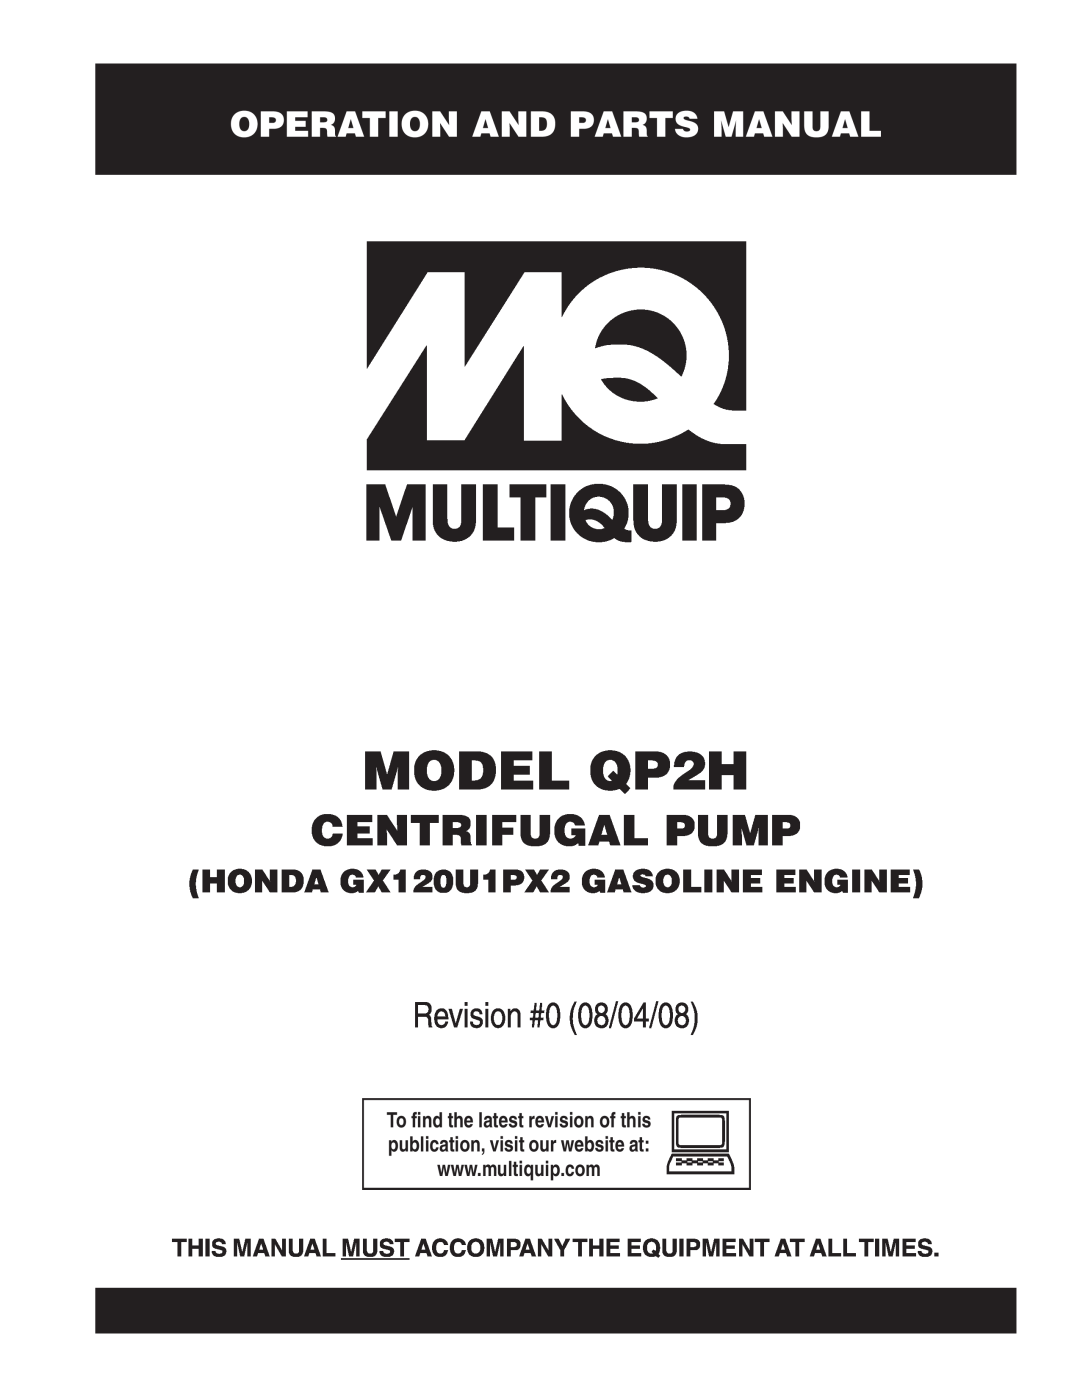 Multiquip manual Operation And Parts Manual, MODEL QP2H, Centrifugal Pump, Revision #1 01/29/14 